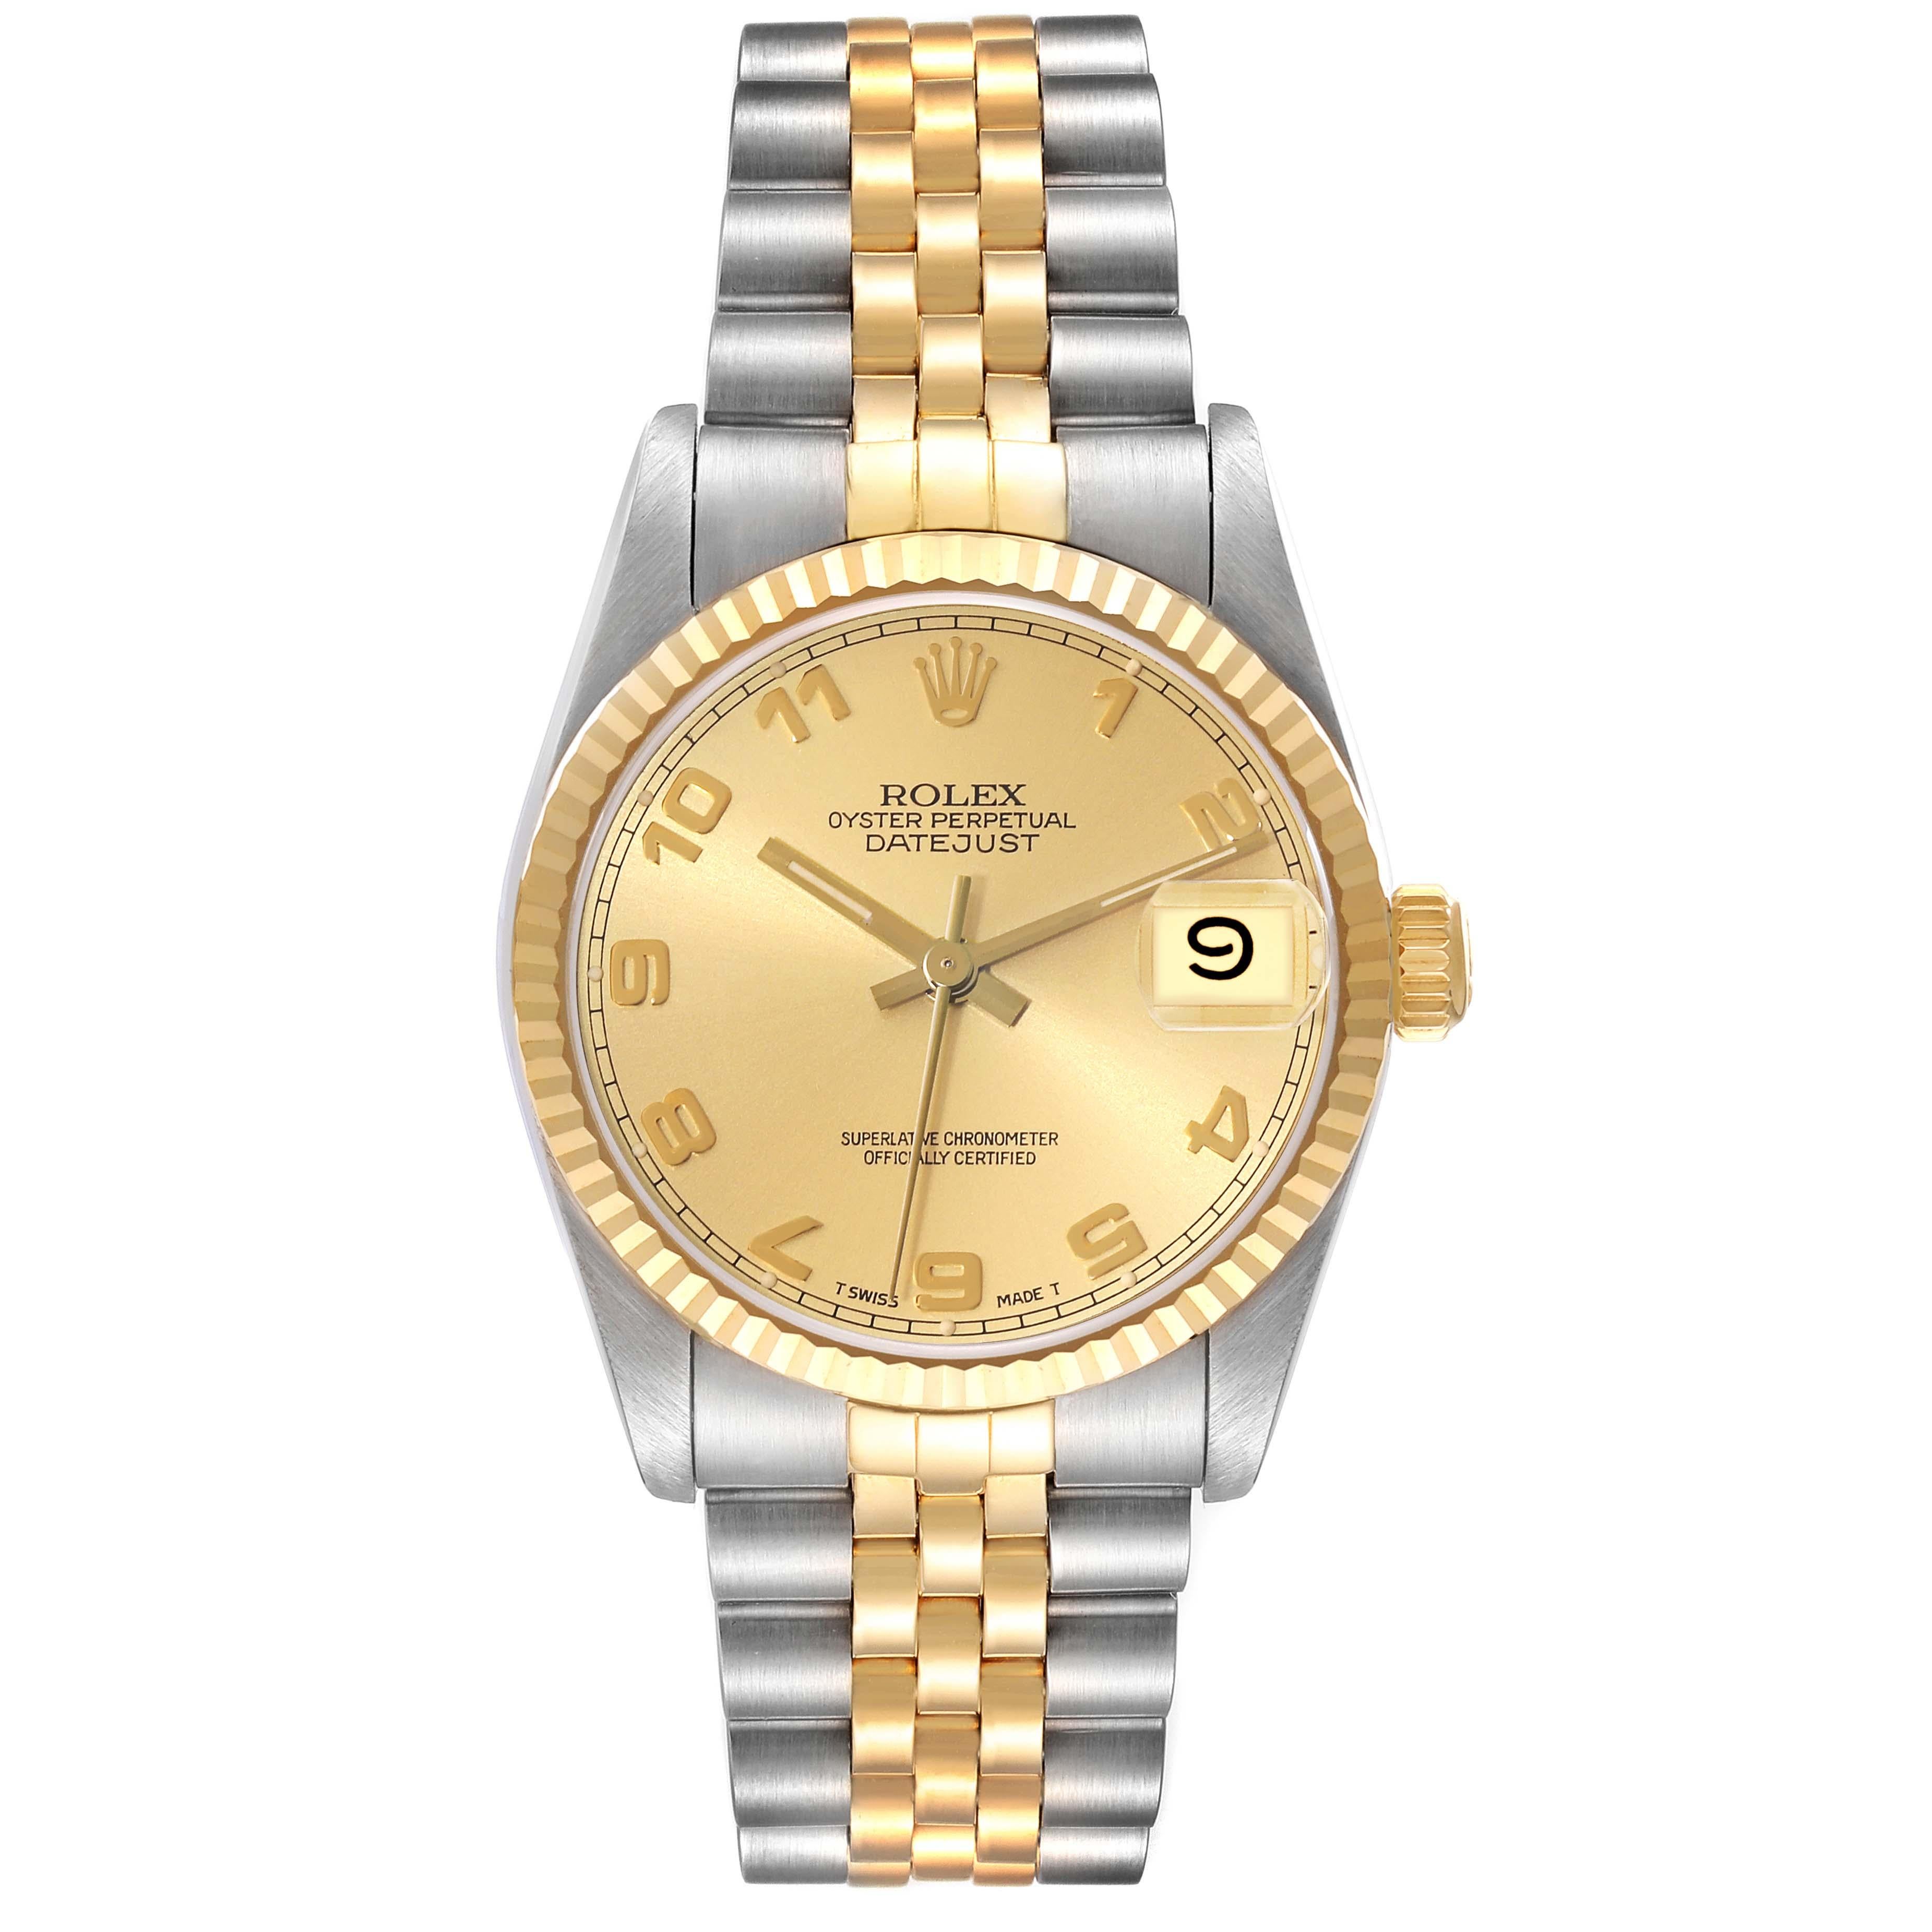 Rolex Datejust Midsize Arabic Dial Steel Yellow Gold Ladies Watch 68273. Officially certified chronometer automatic self-winding movement. Stainless steel oyster case 31 mm in diameter. Rolex logo on an 18K yellow gold crown. 18k yellow gold fluted